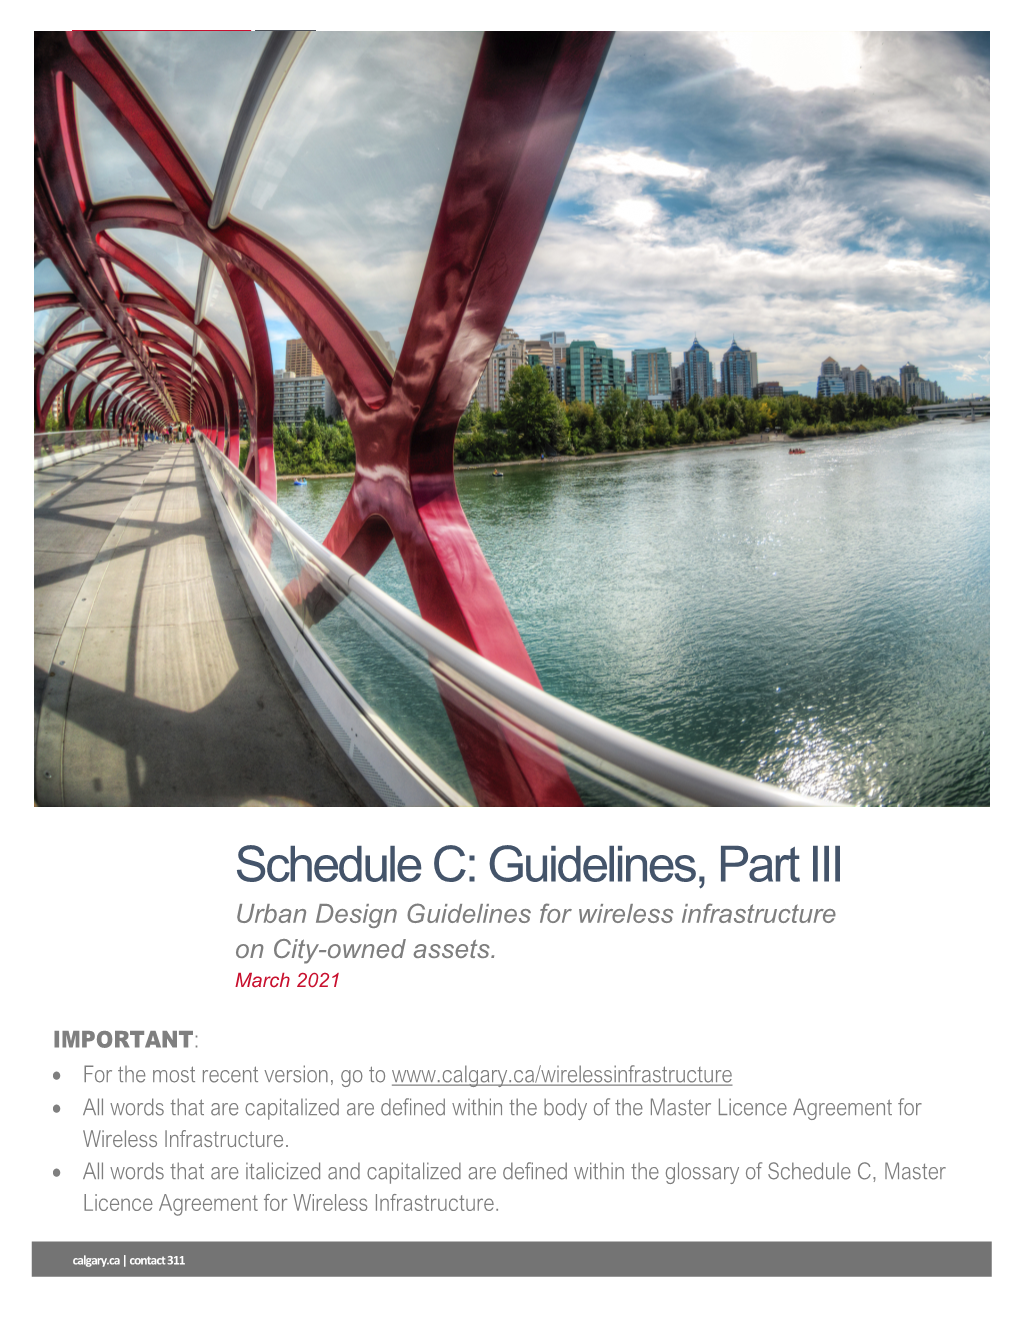 Schedule C: Guidelines, Part III Urban Design Guidelines for Wireless Infrastructure on City-Owned Assets